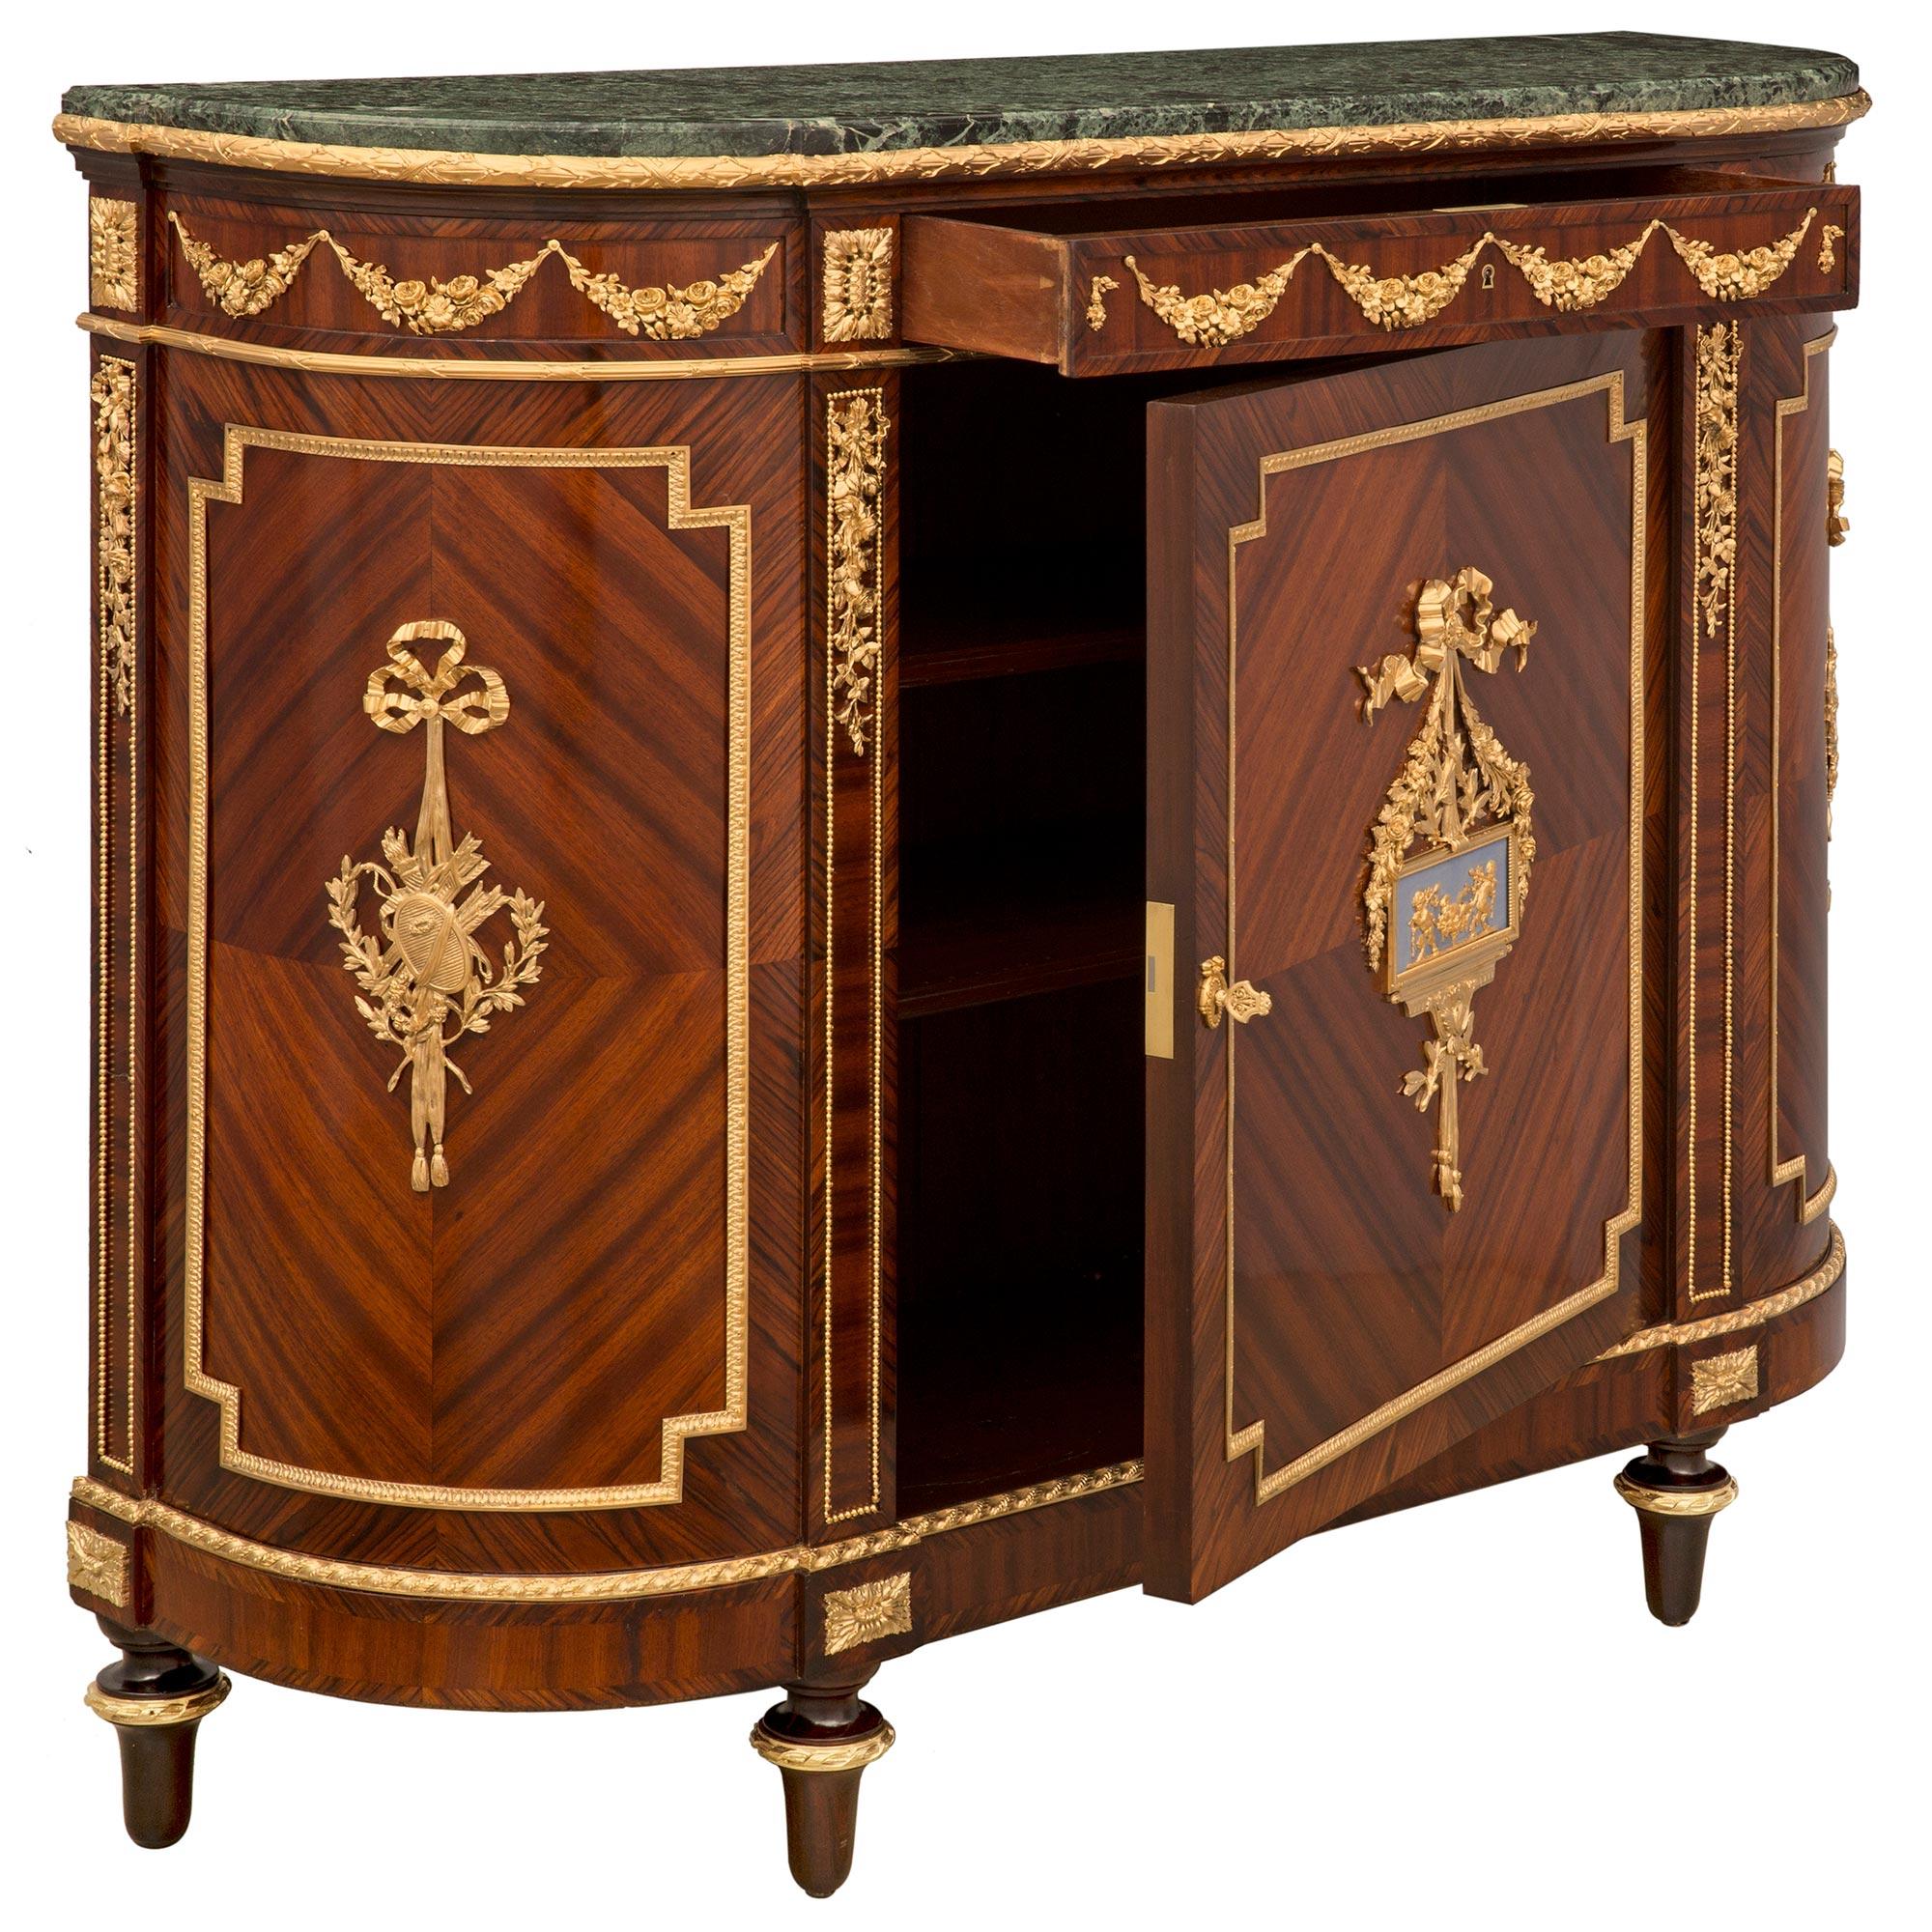 French 19th Century Louis XVI St. Kingwood, Wedgwood, Ormolu, and Marble Cabinet In Good Condition For Sale In West Palm Beach, FL